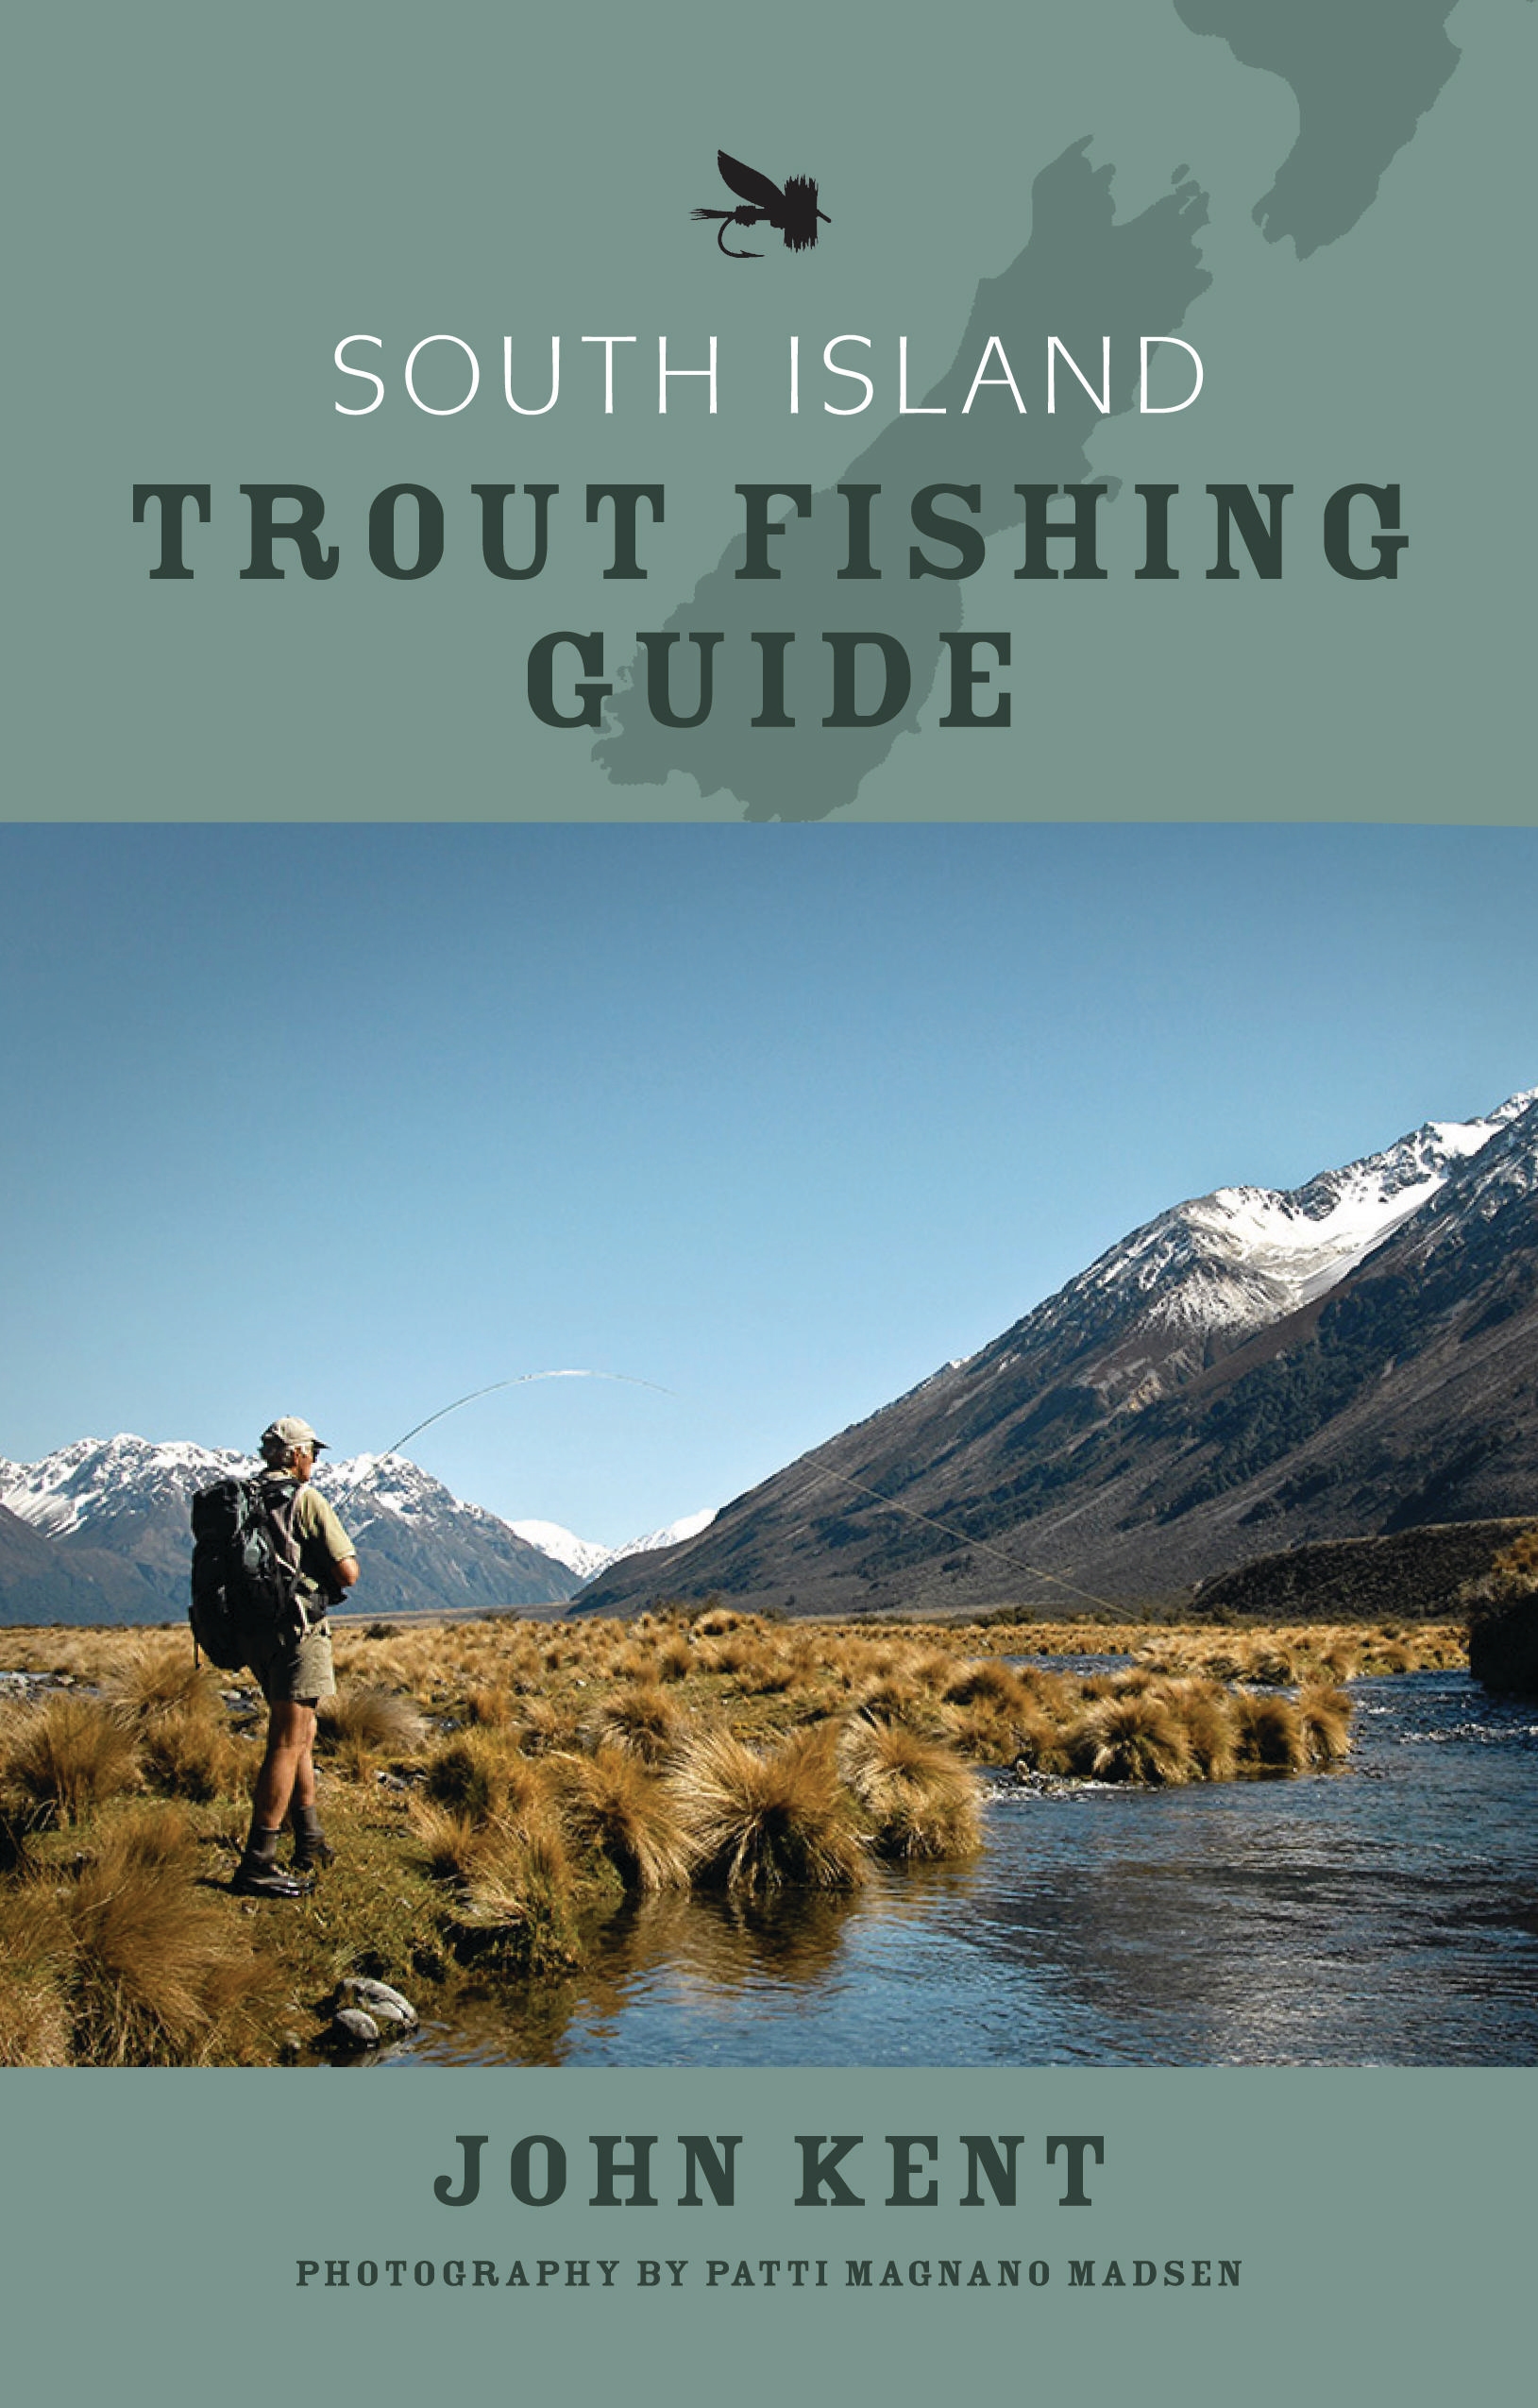 South Island Trout Fishing Guide by John Kent - Penguin Books